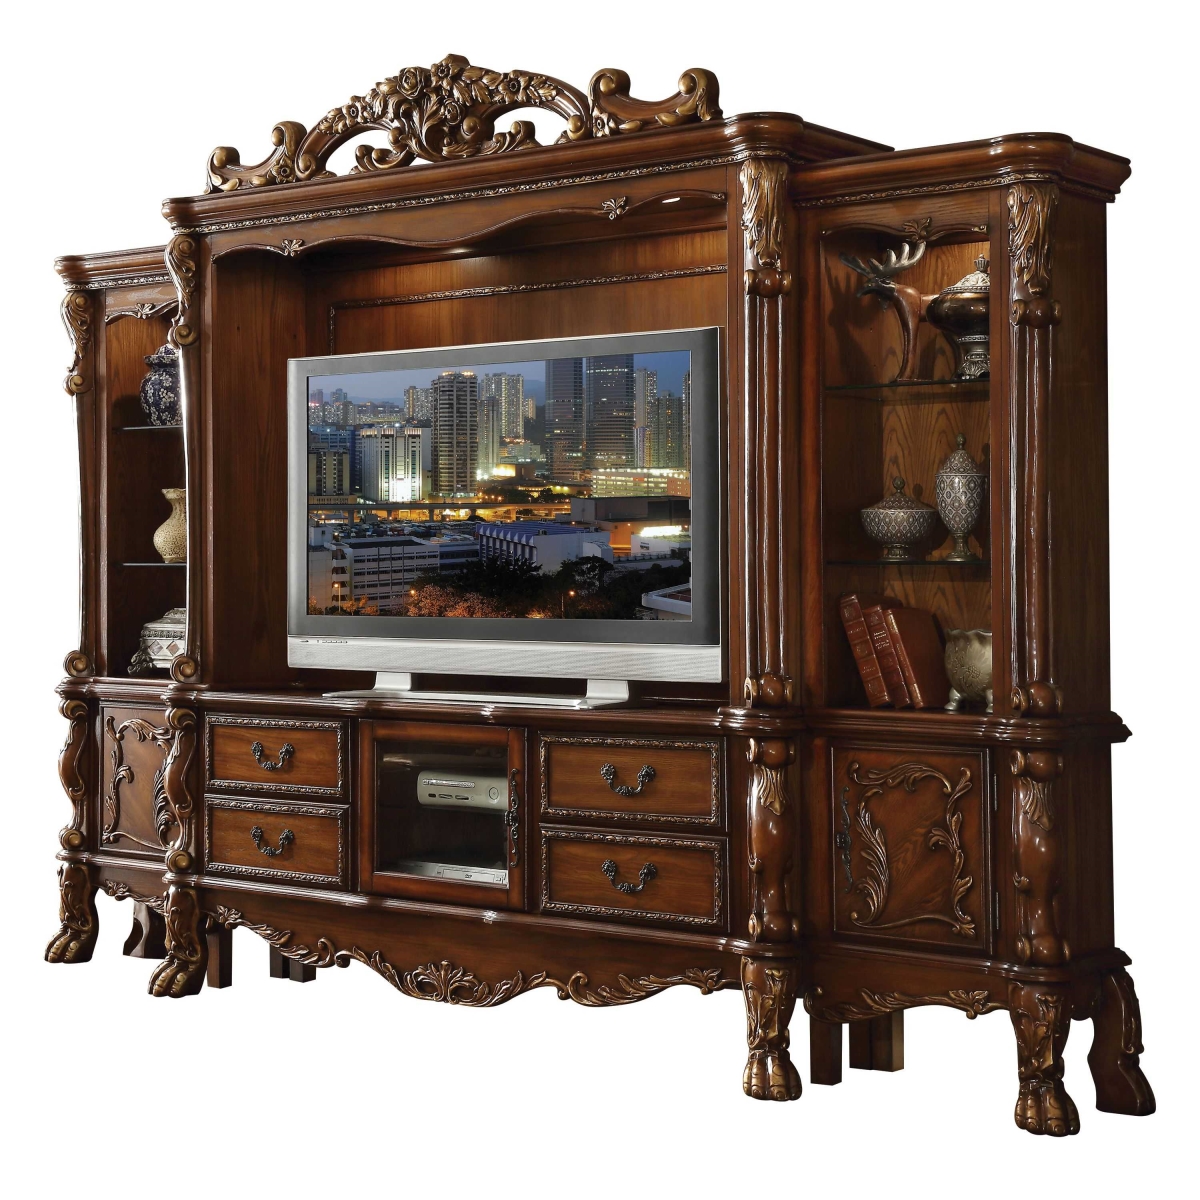 HomeRoots 348658 19 x 121 x 90 in. Cherry Oak Wood Poly Resin Glass Entertainment Center